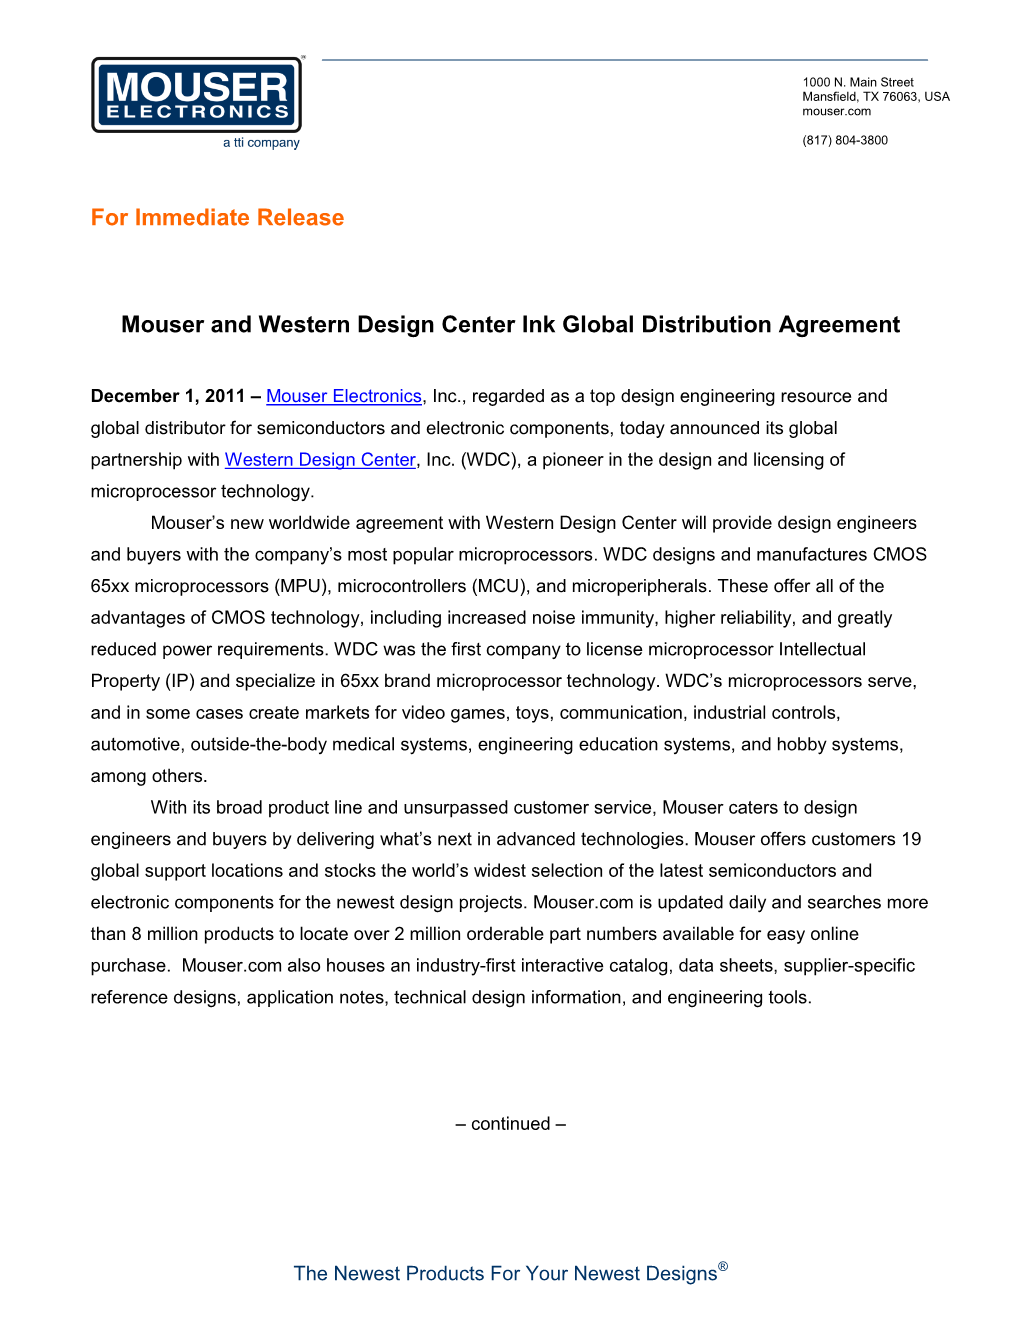 For Immediate Release Mouser and Western Design Center Ink